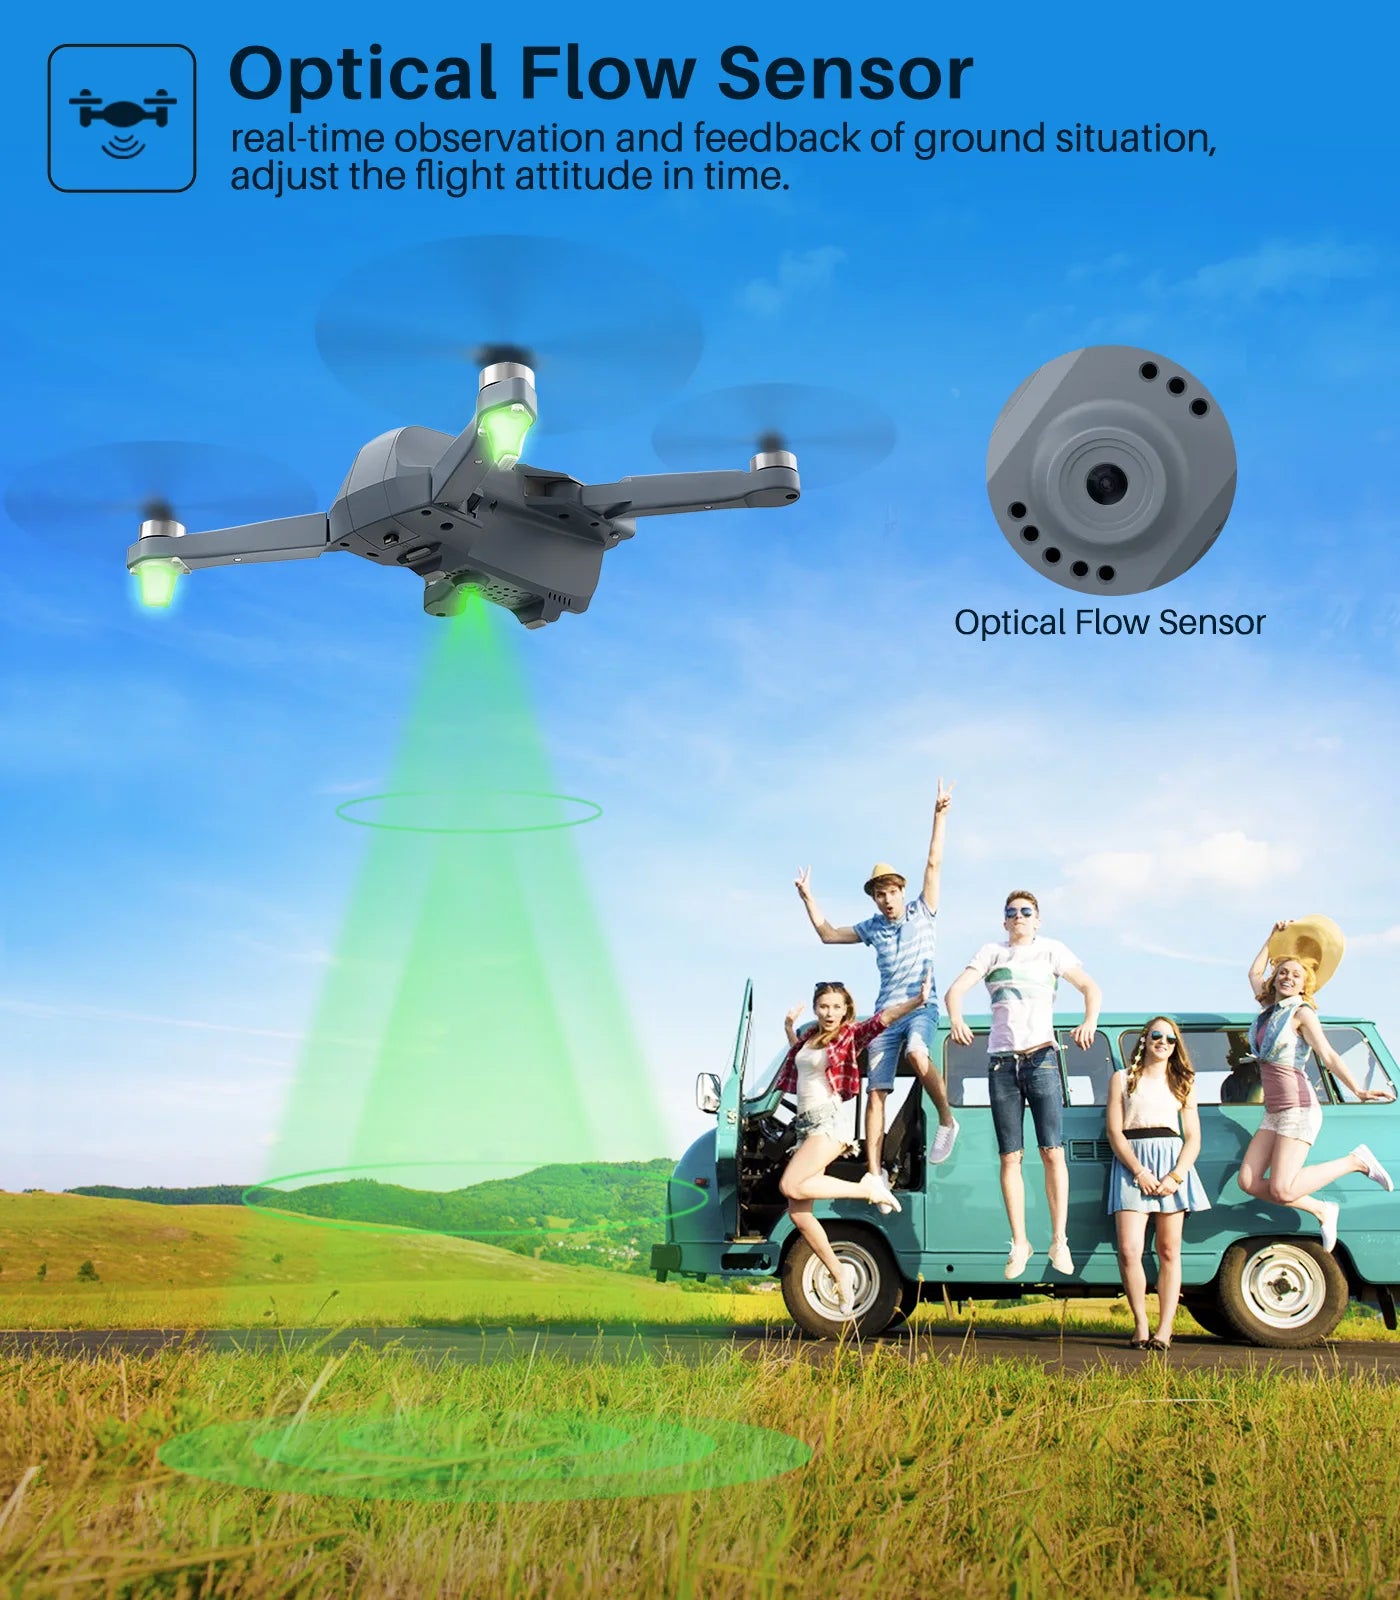 SYMA X500Pro GPS Drone, Optical Flow Sensor real-time observation and feedback of ground situation . Opti